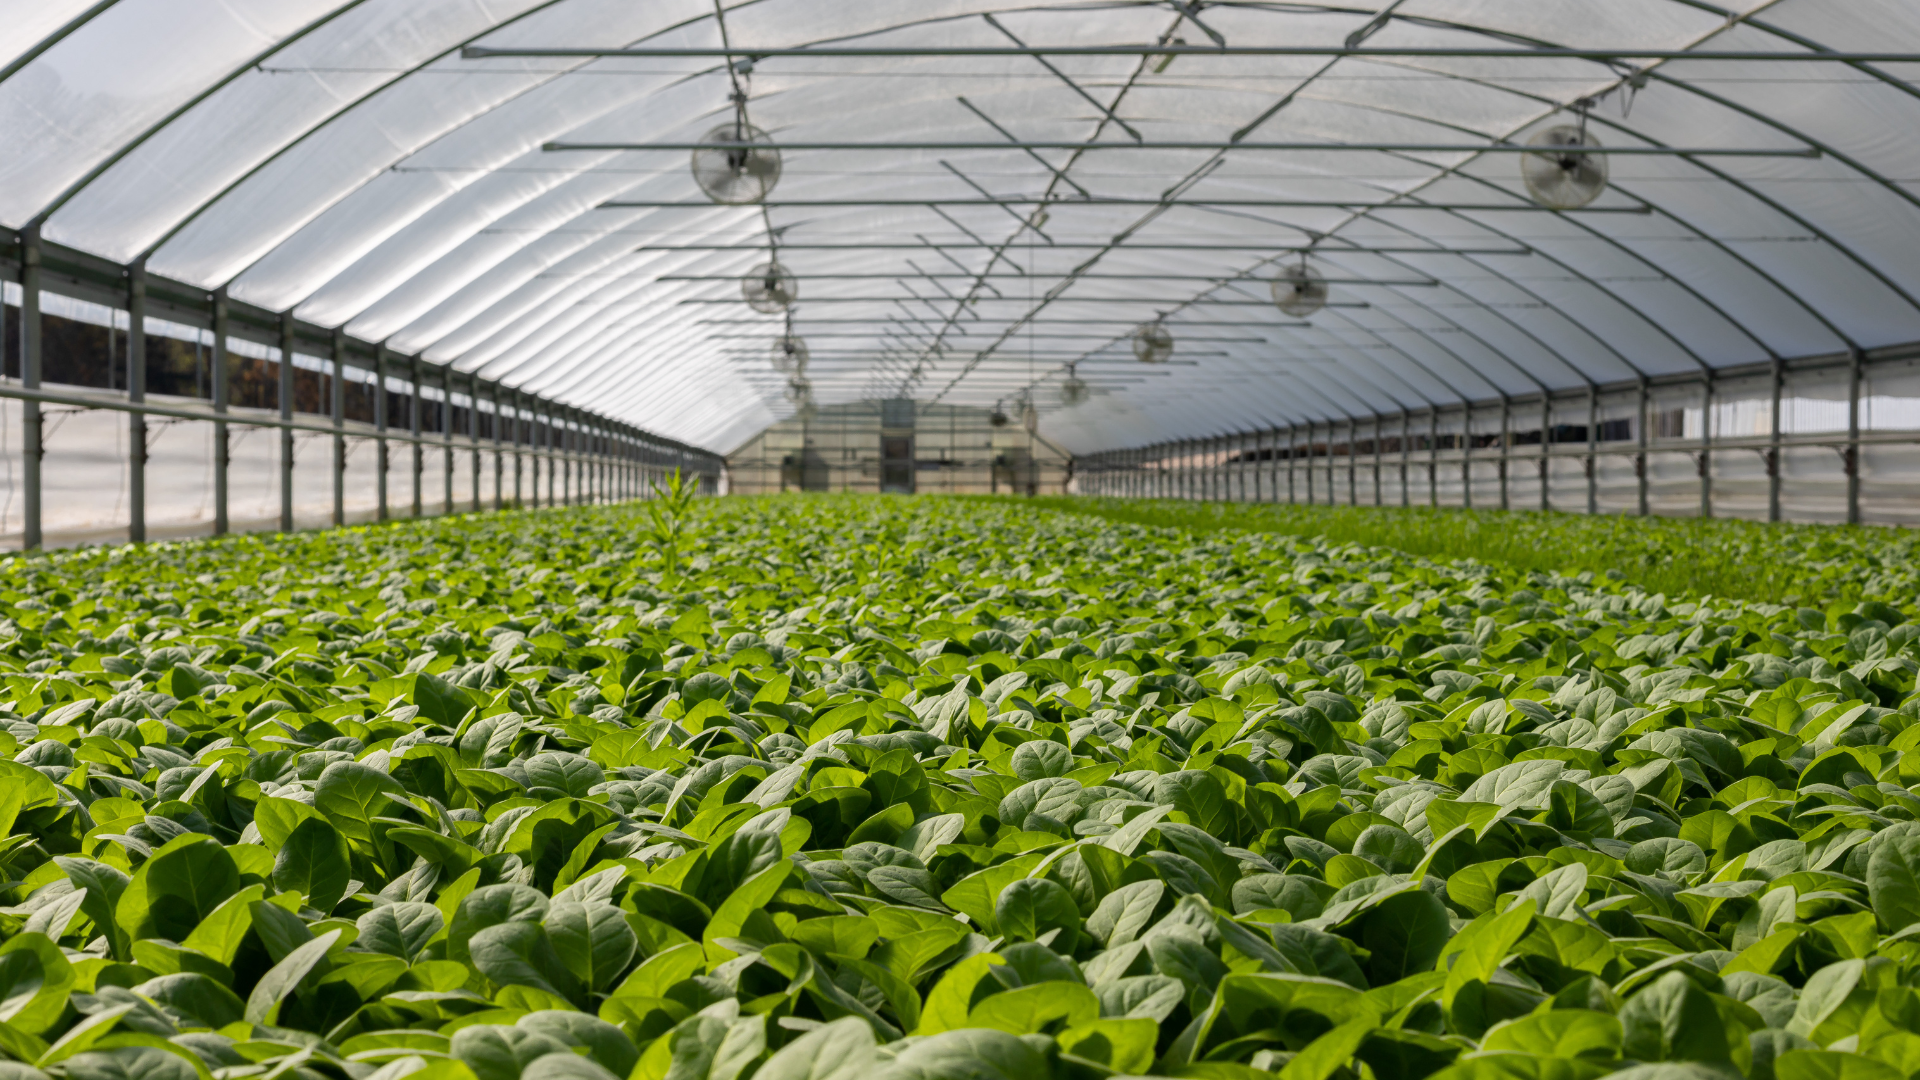 Crop Steering With Nitrogen Blog Image Showcasing Controlled Environment Agricultural Greenhouse